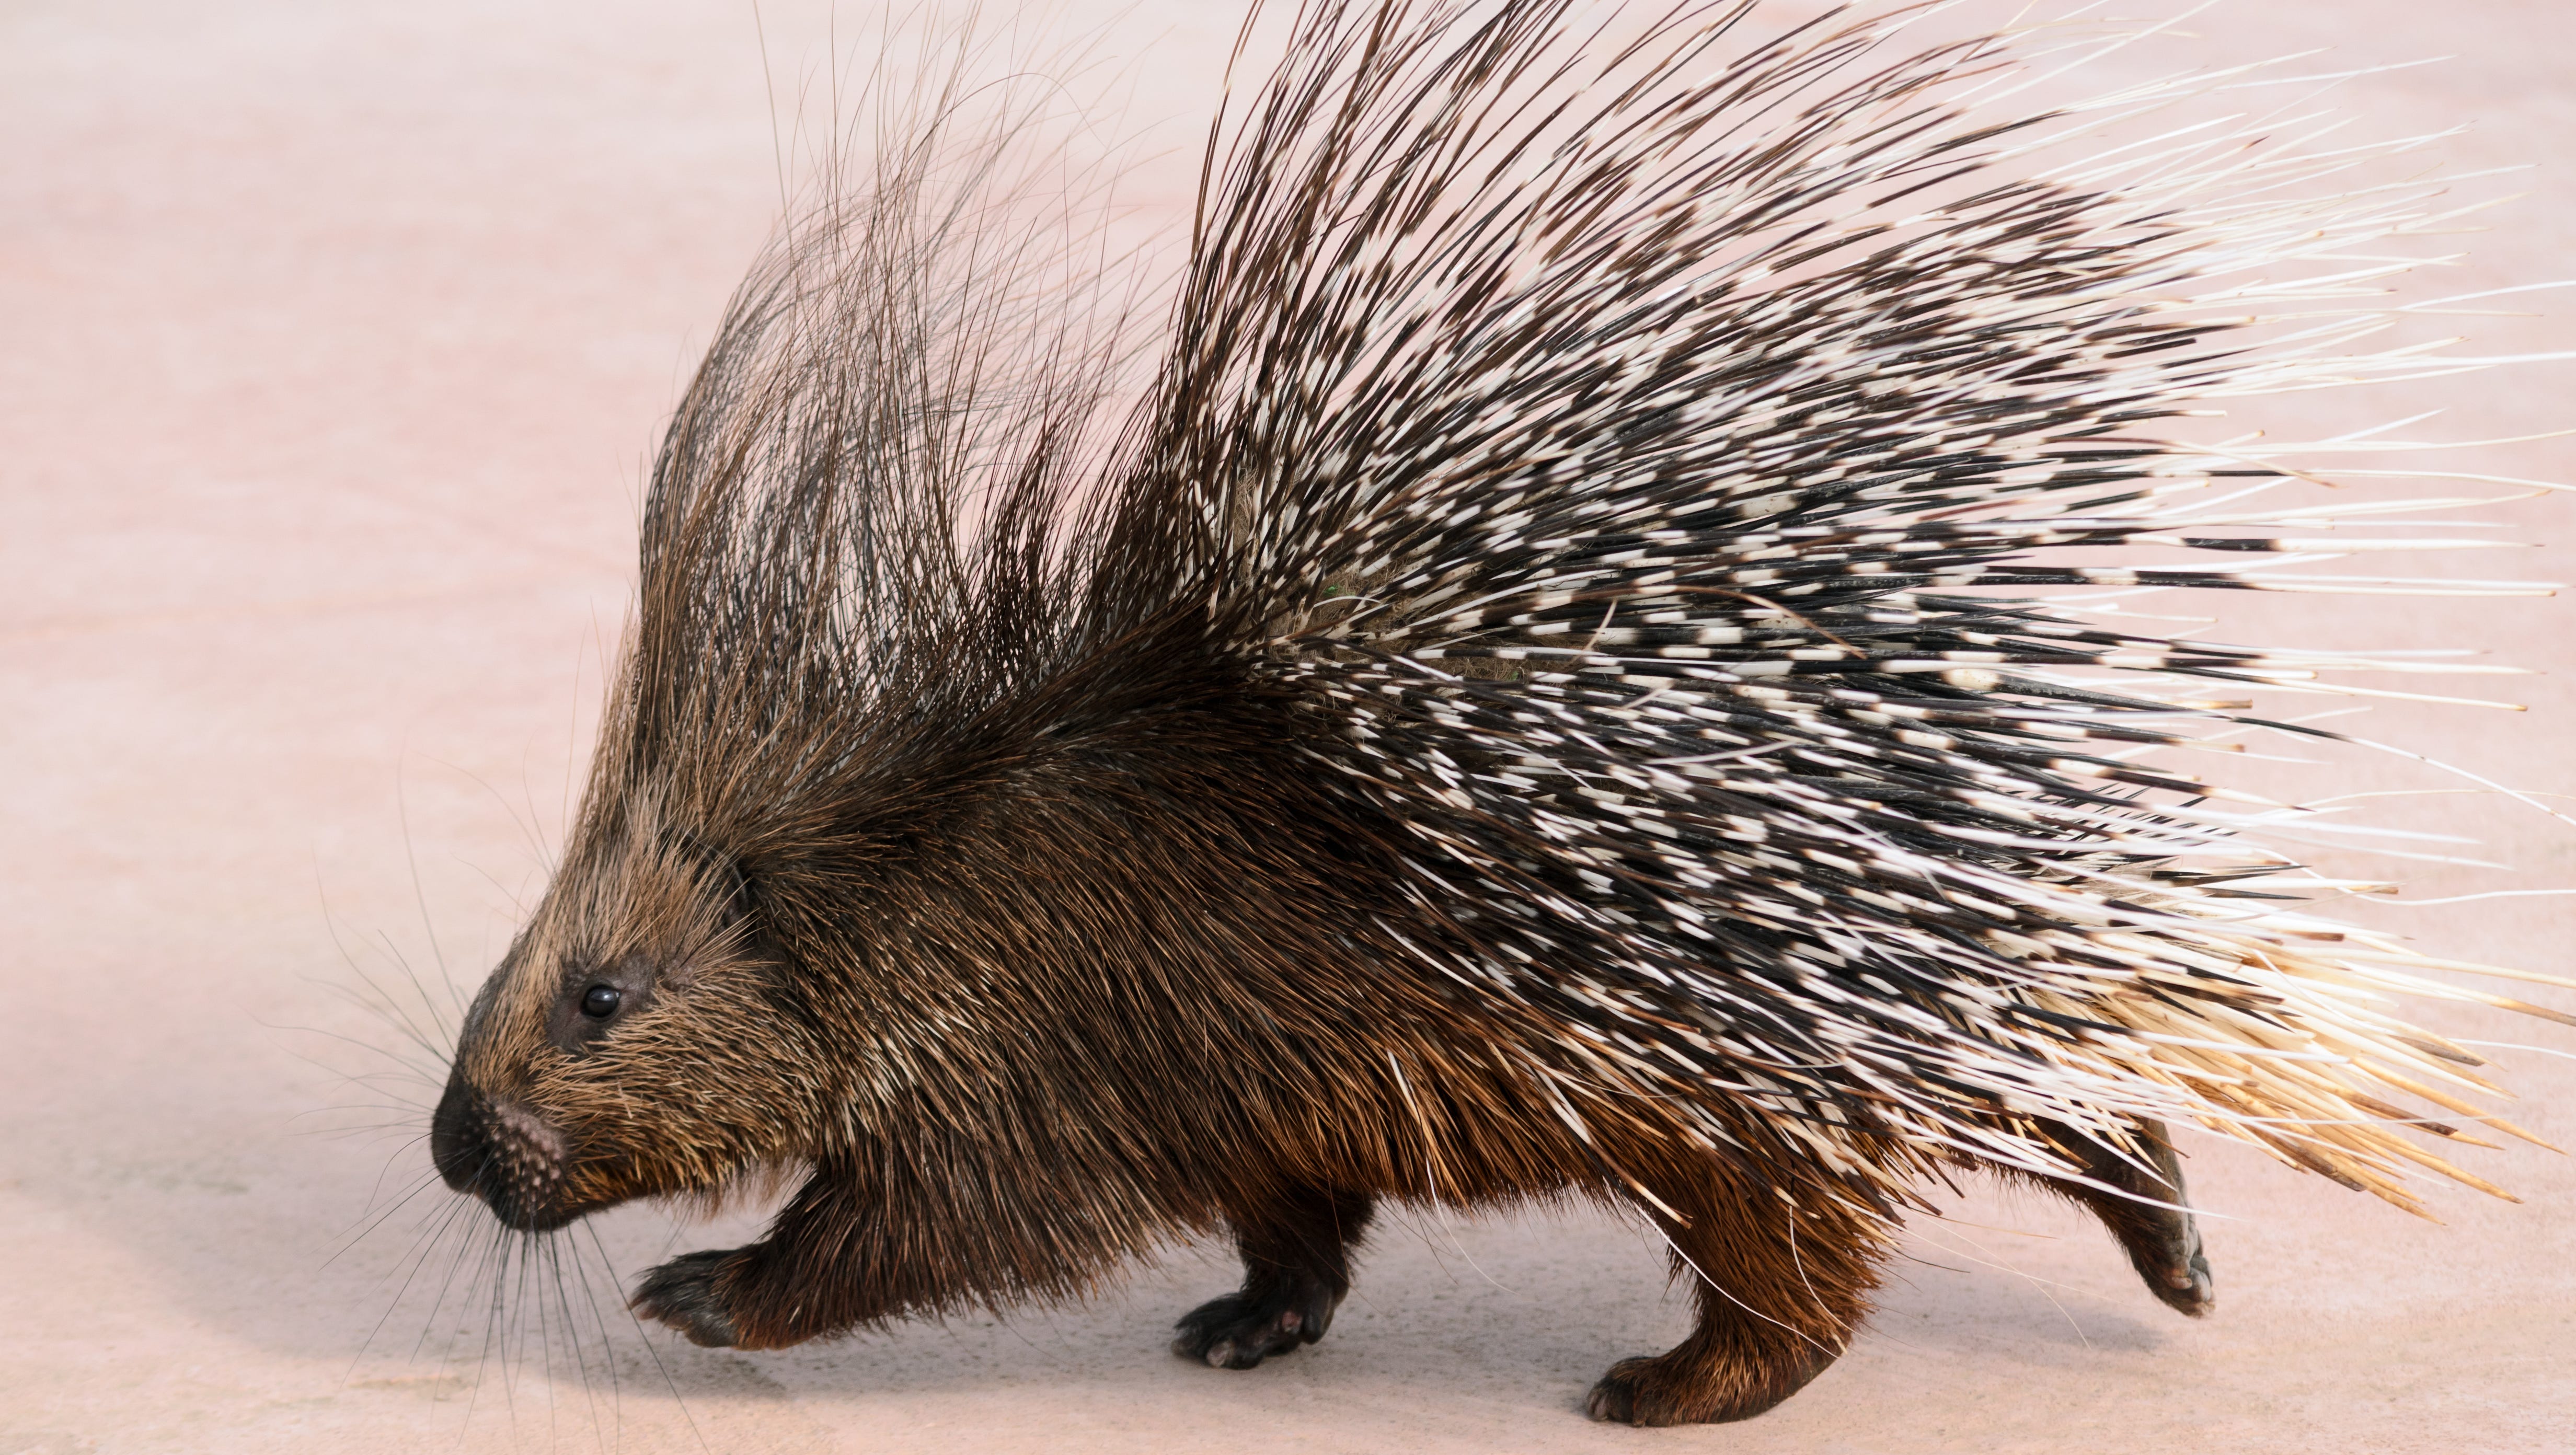 Woman eats porcupine quill without realizing it